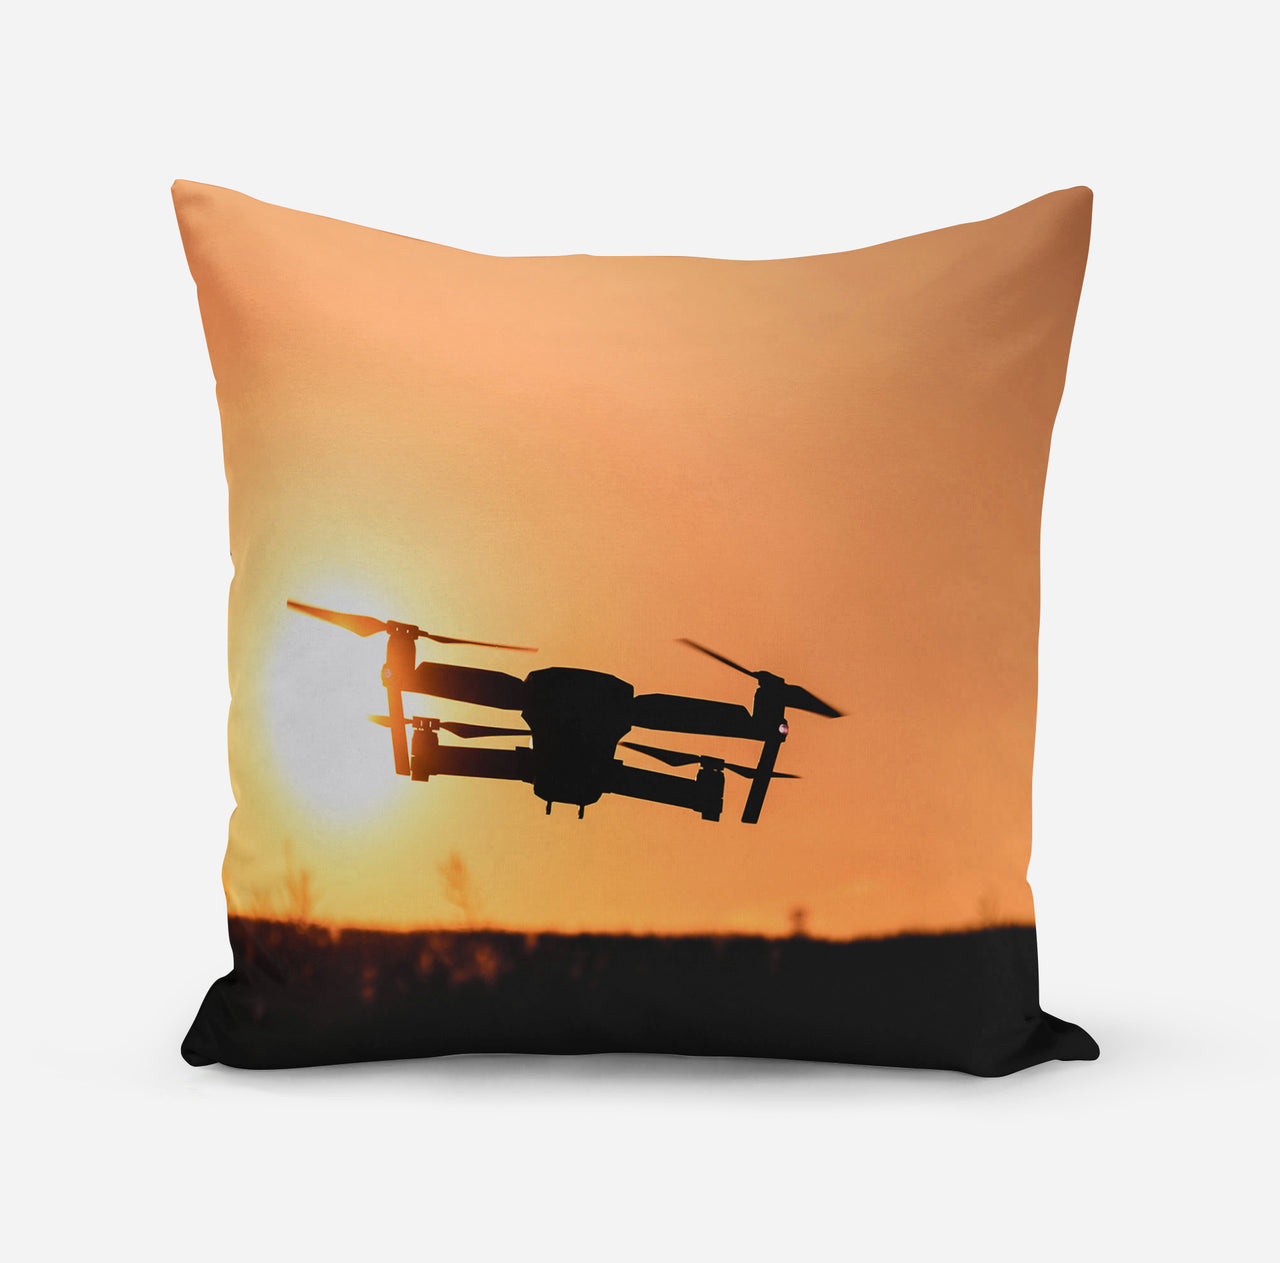 Amazing Drone in Sunset Designed Pillows